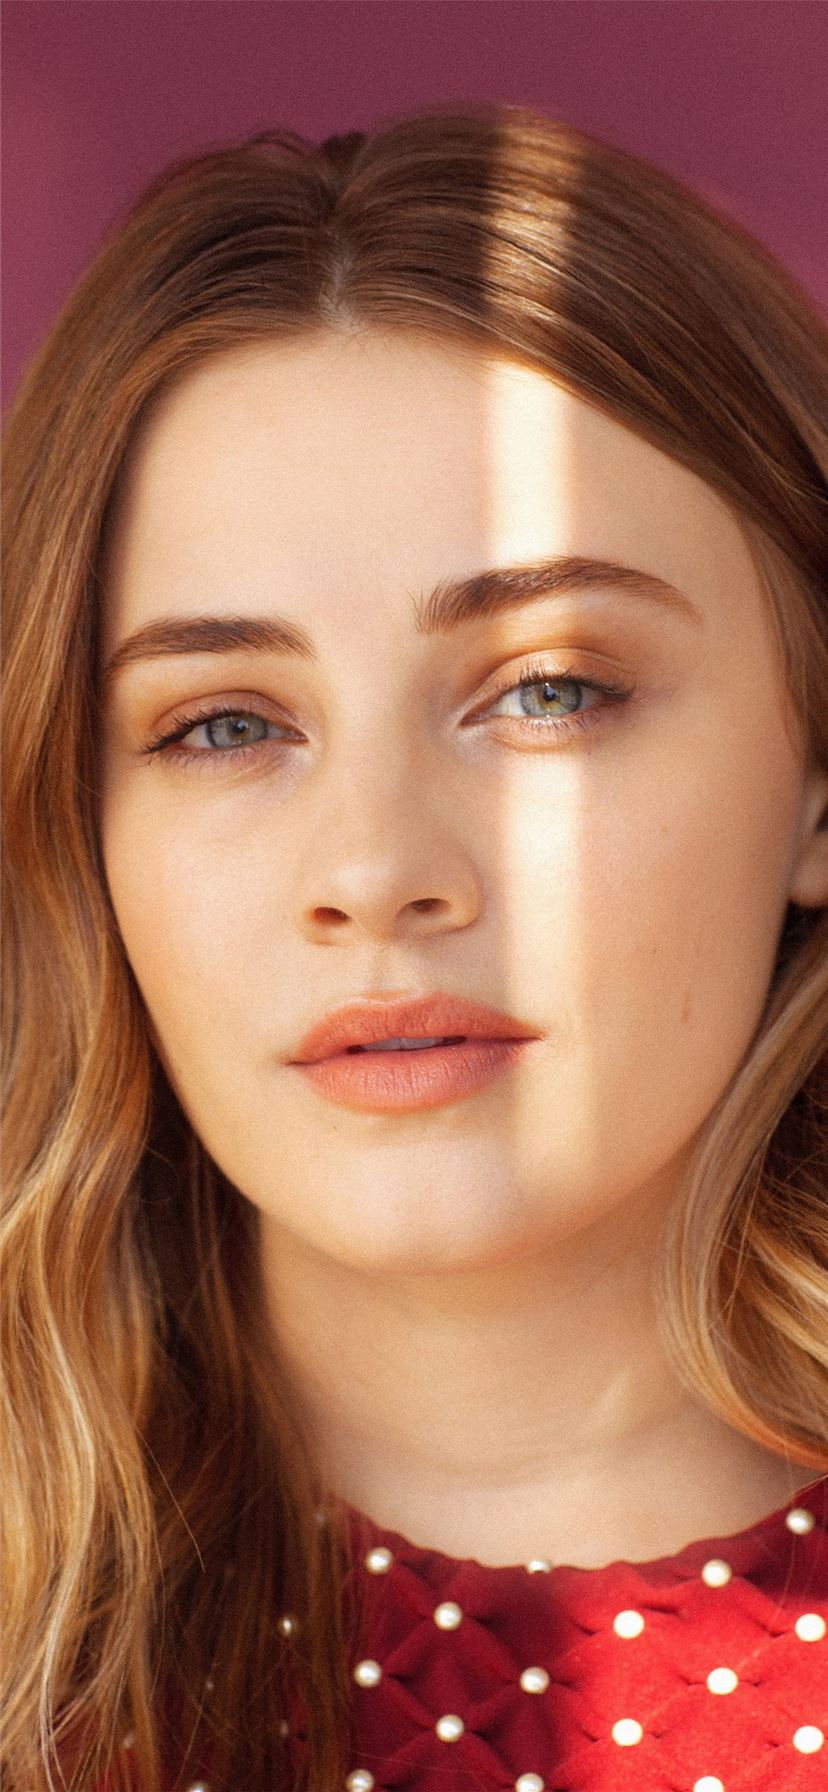 josephine langford face portrait 4k iPhone 11 Wallpapers Free Download